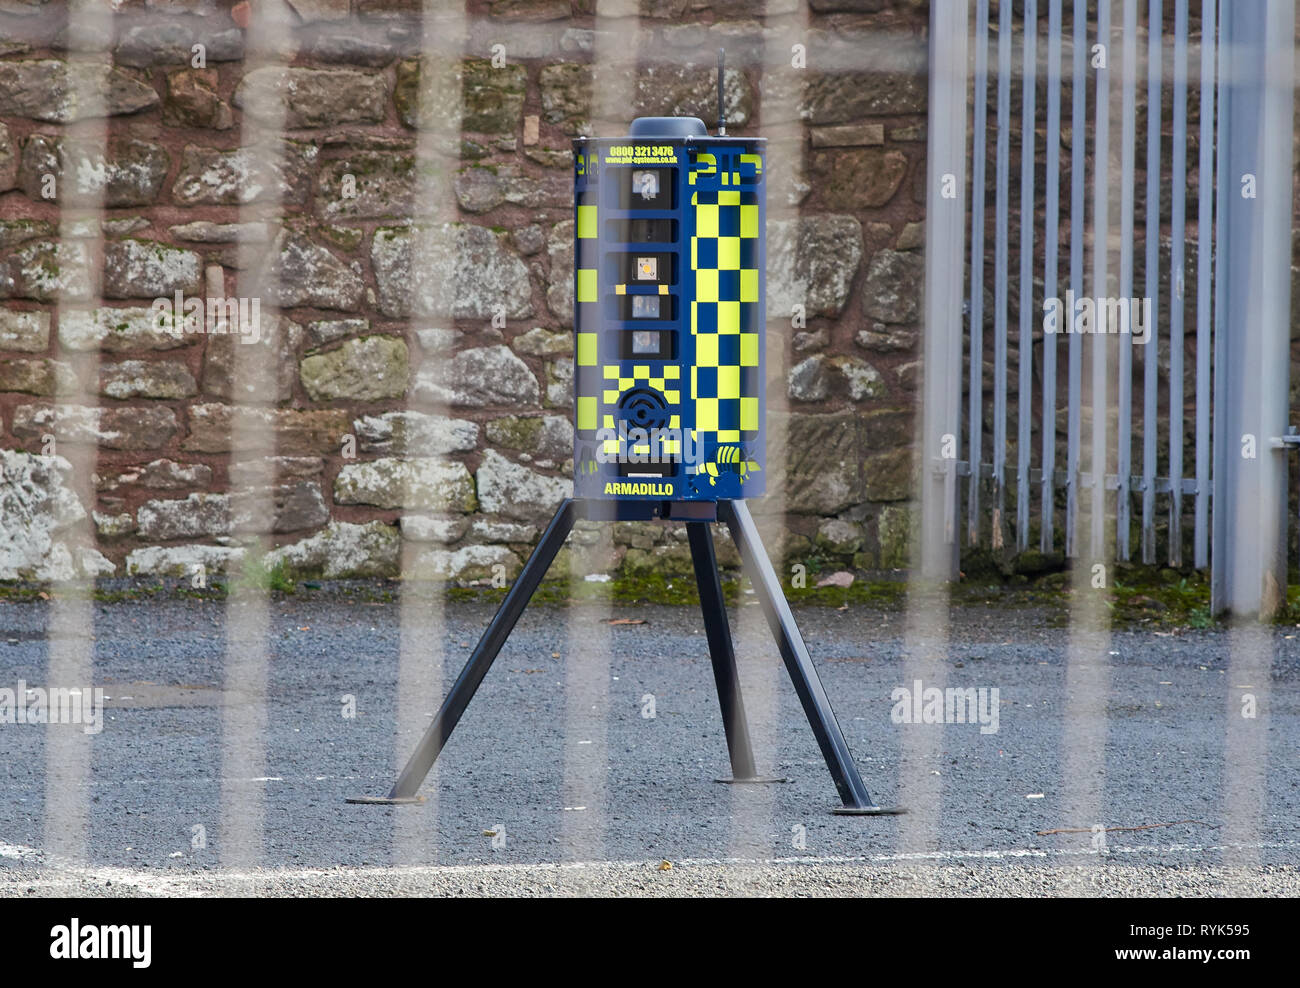 A Perimeter Intruder Detection System (PID) with mobile CCTV tower installed by Police to guard the old surgery building in Gorbals, Scotland, UK Stock Photo